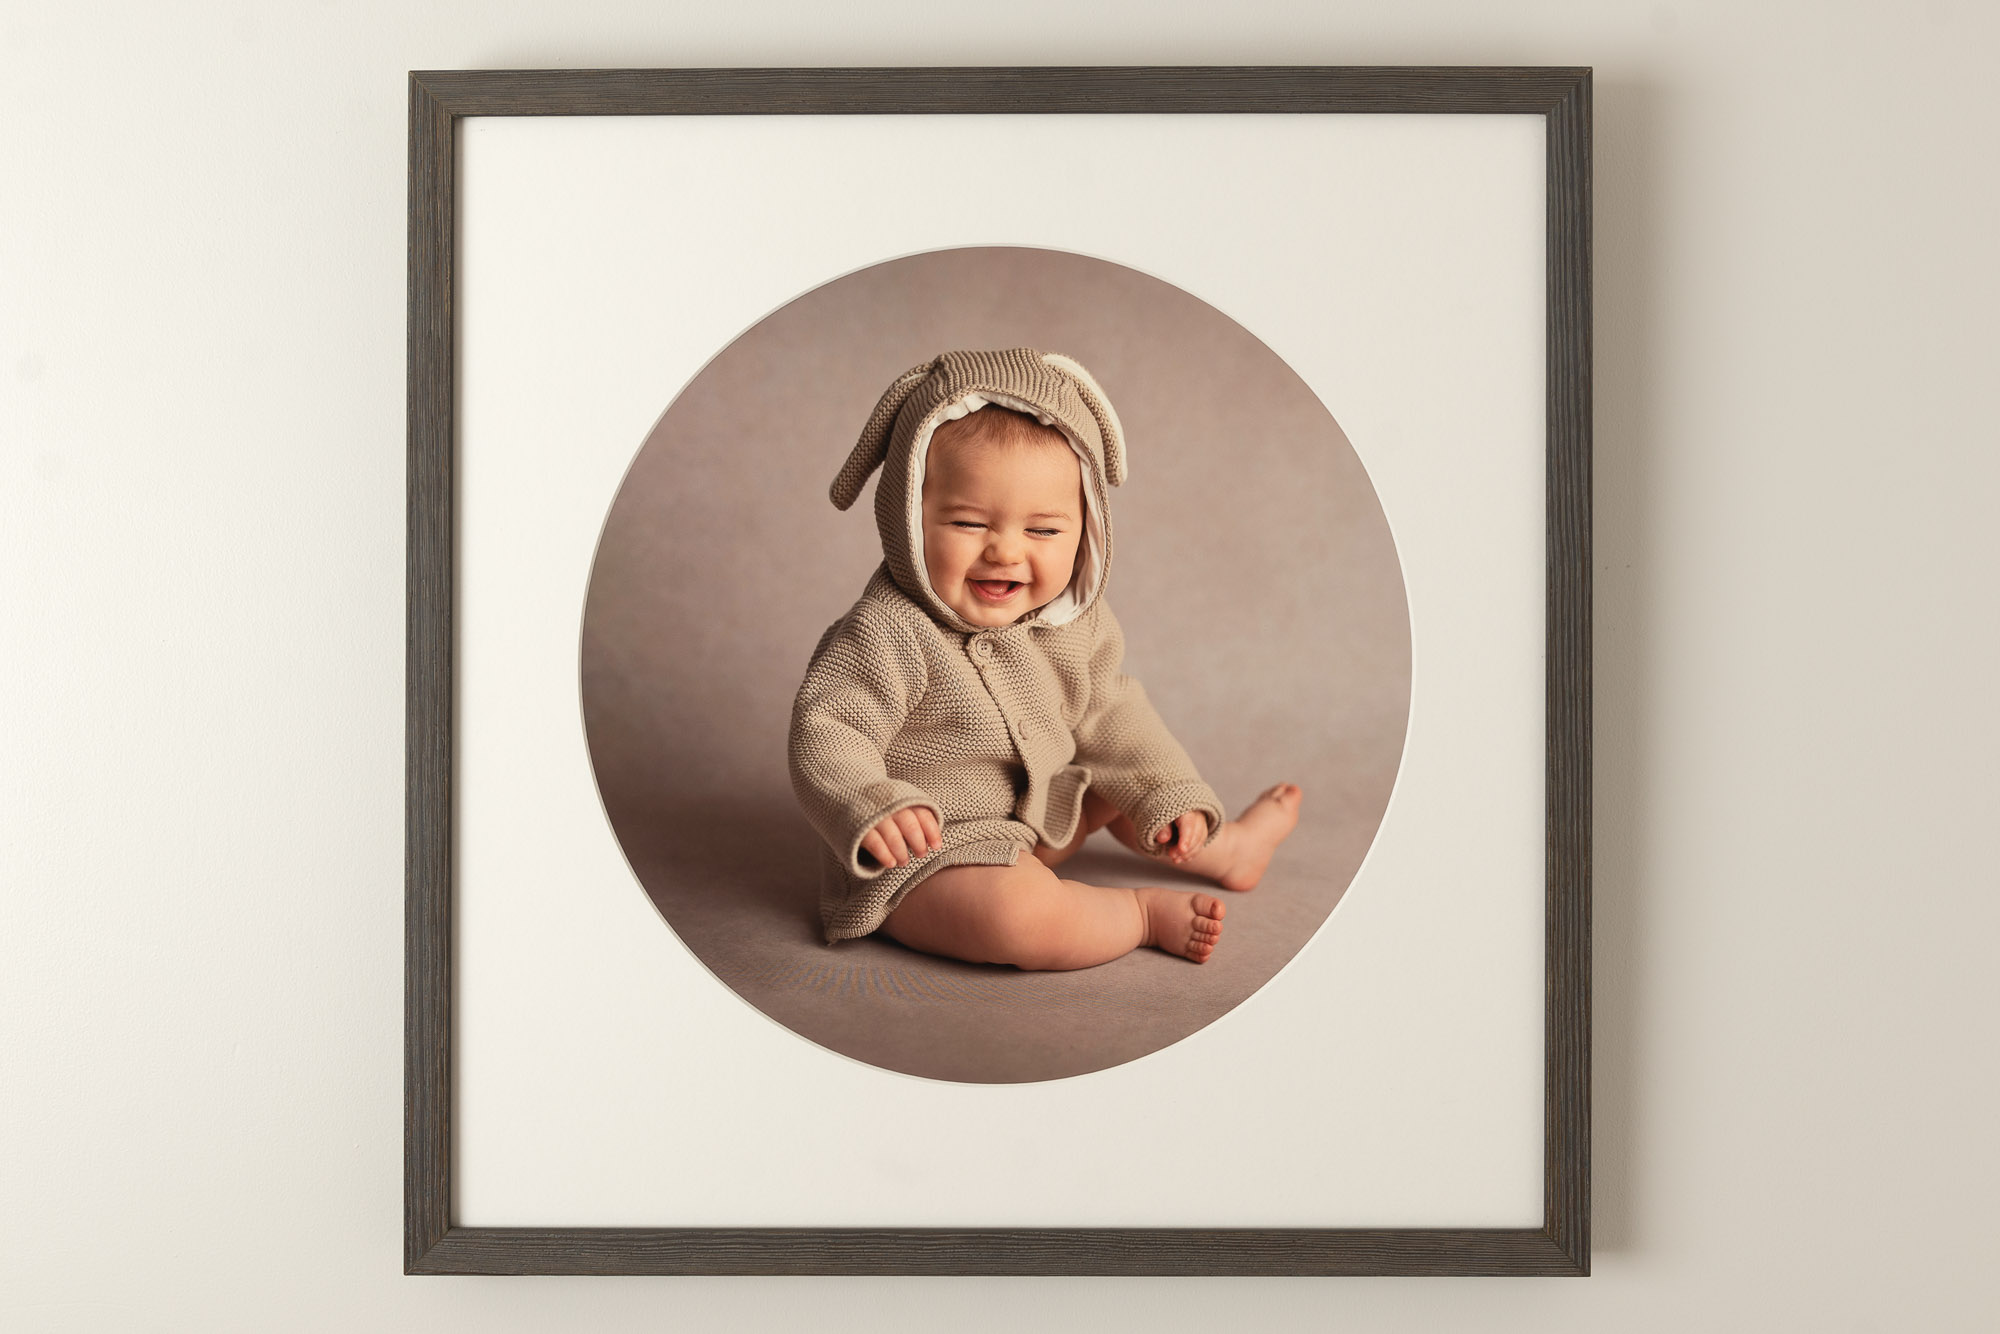 framed image of laughing baby